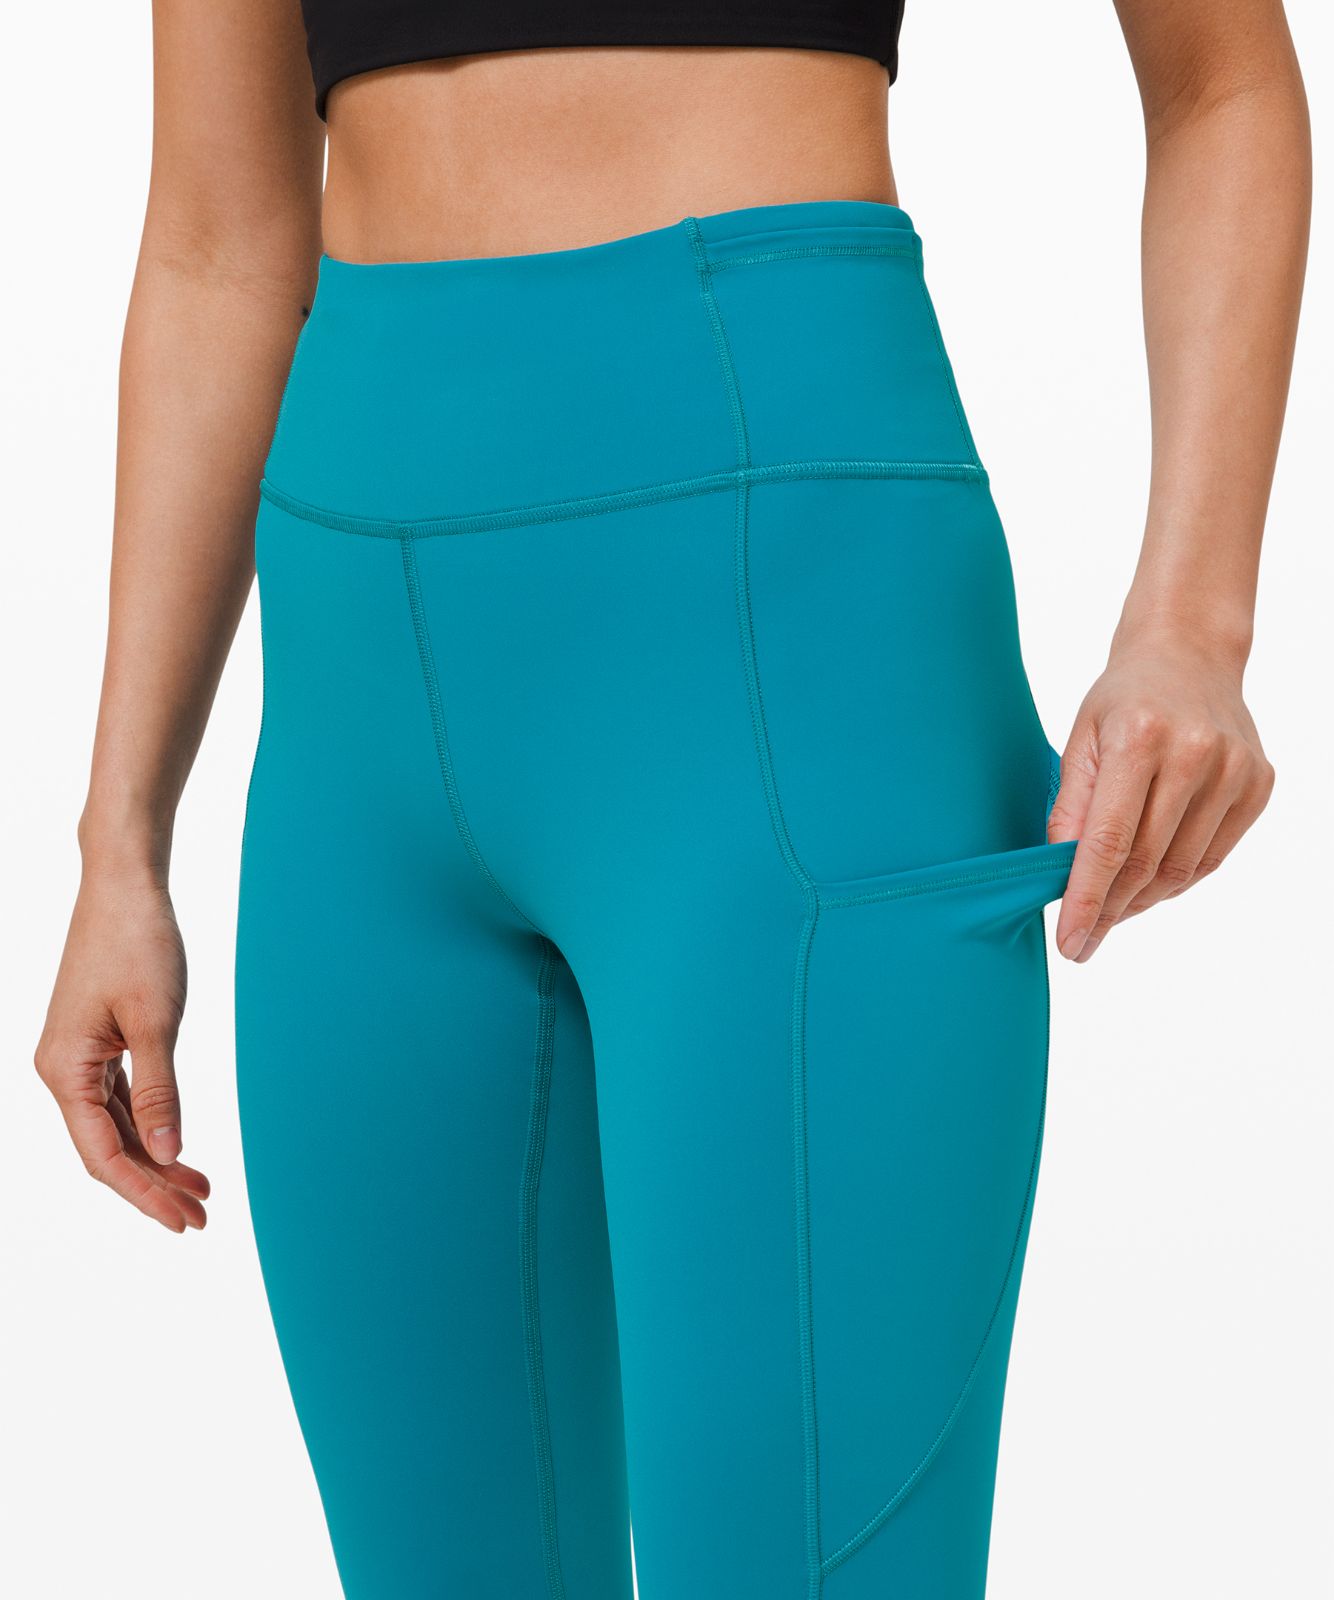 Lululemon Fast Free High-Rise Tight 28” Blue Size 4 - $66 (48% Off Retail)  - From Mia